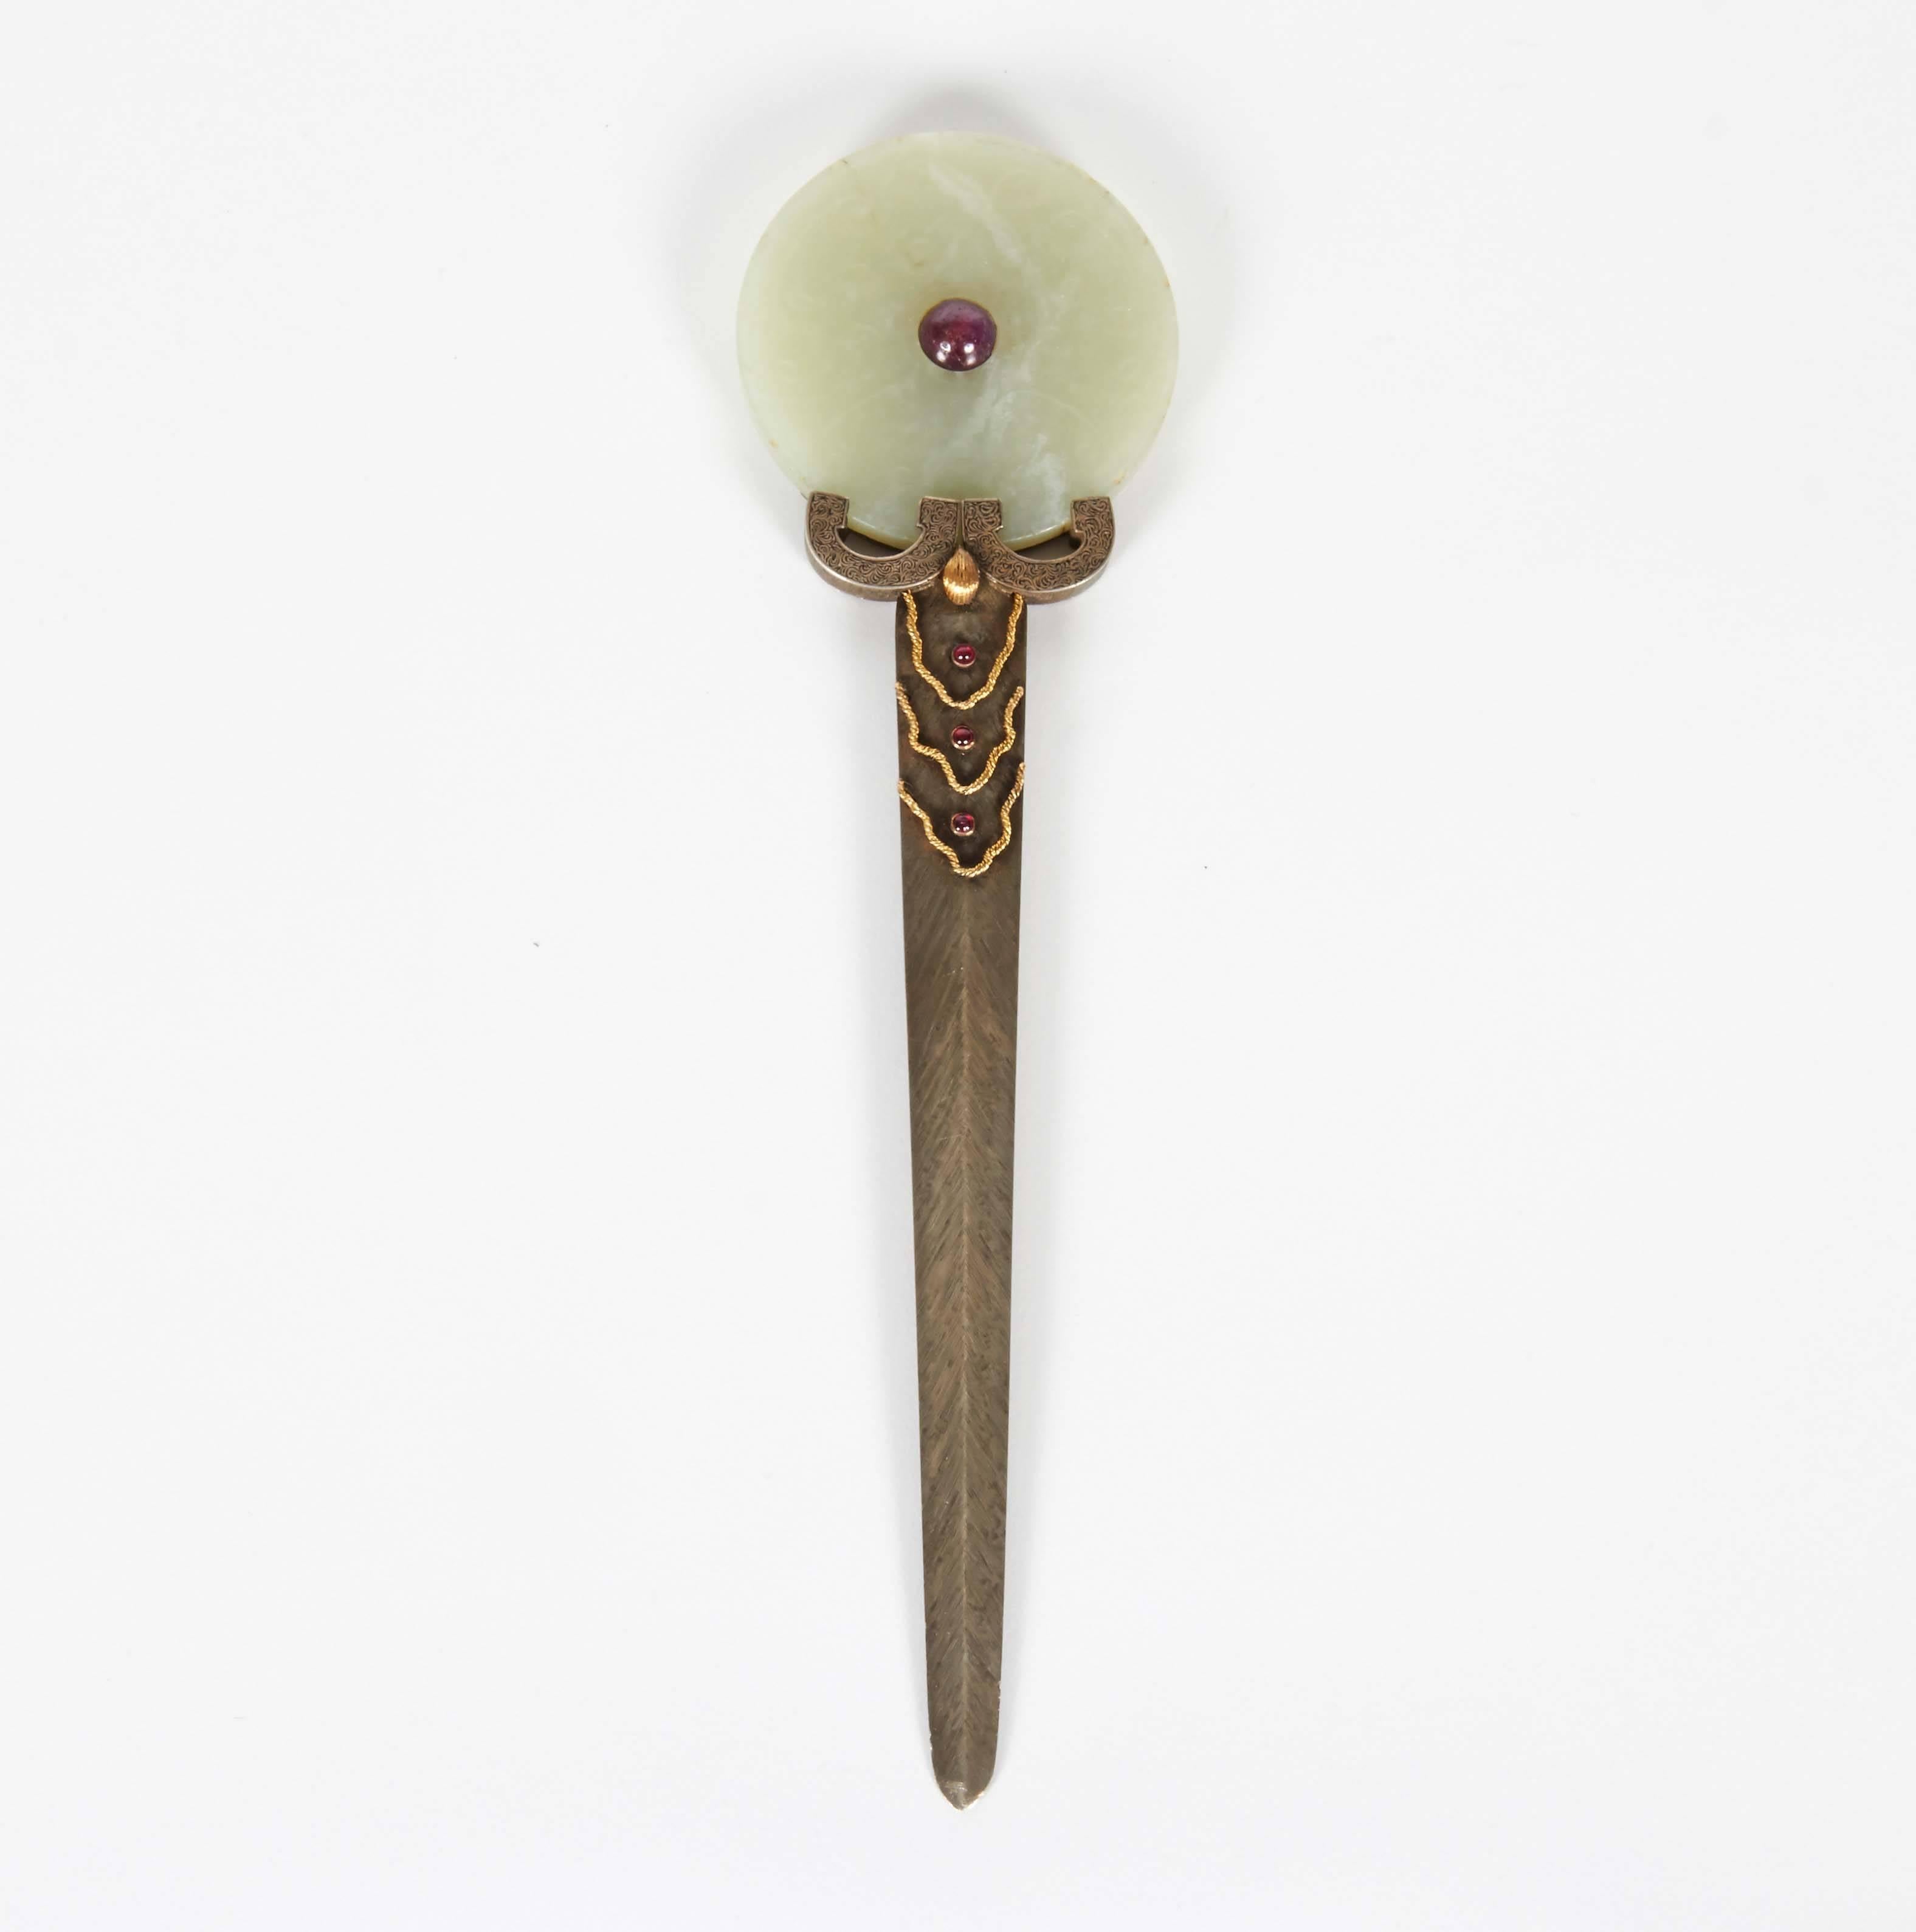 19th Century Italian Silver and Gold Letter Opener with Archaic Chinese Jade & Rubies